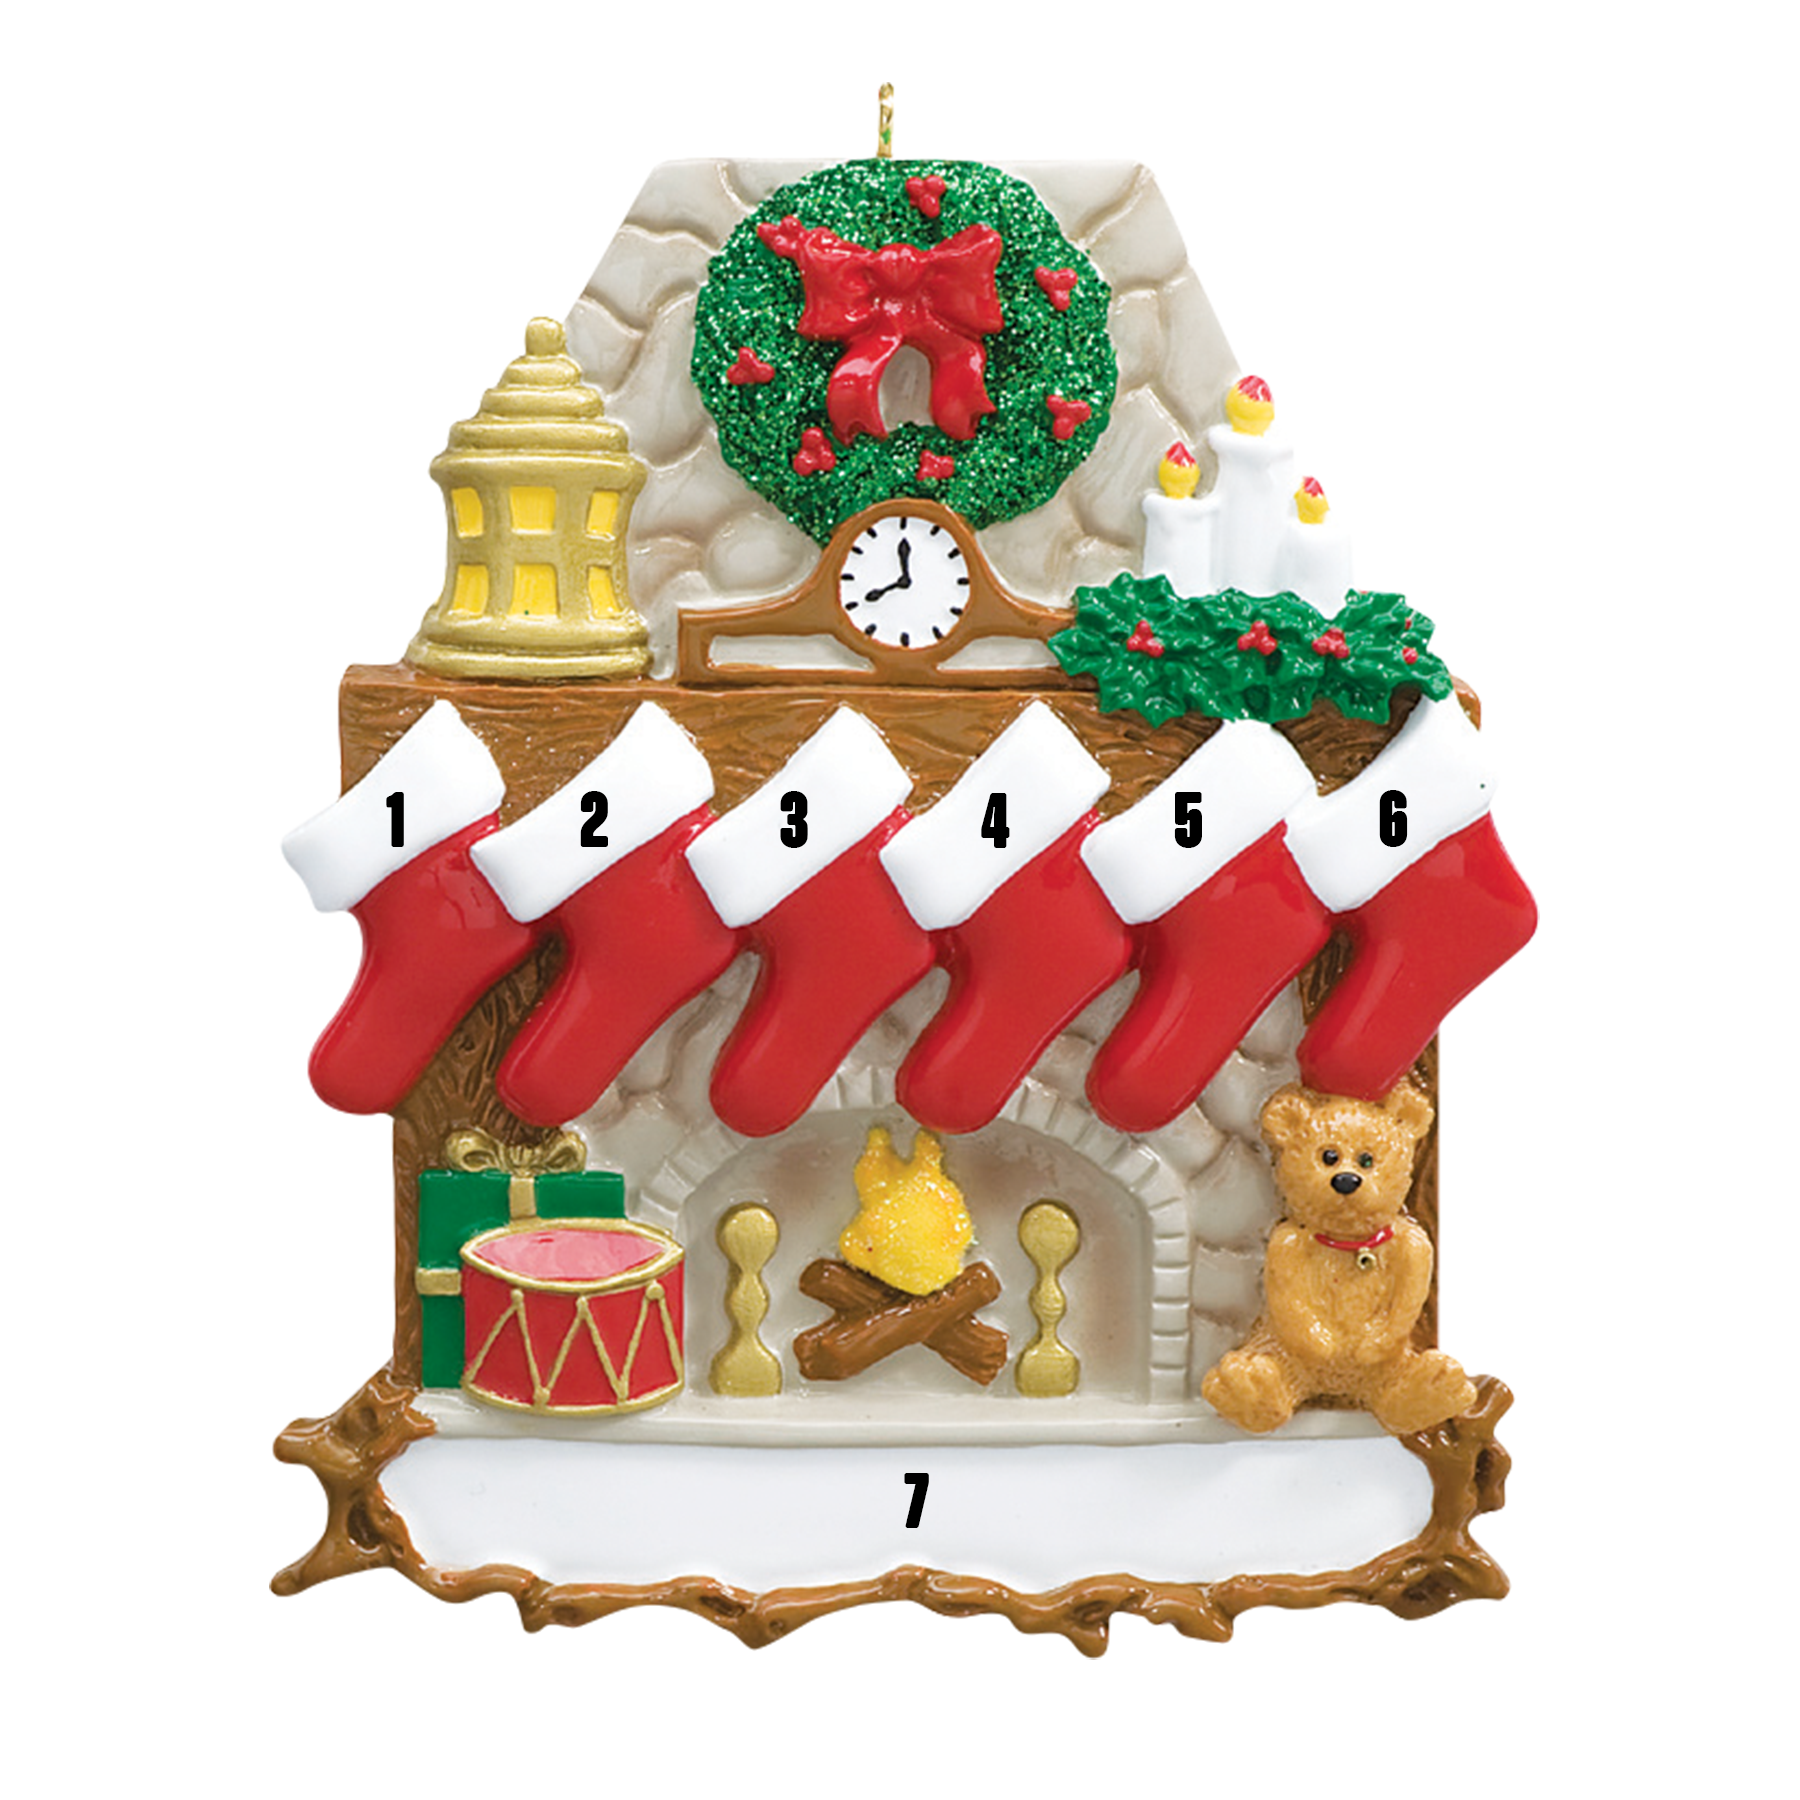 Santa'Ville-Family of Six - Stocking by the fireplace (7451244101806)